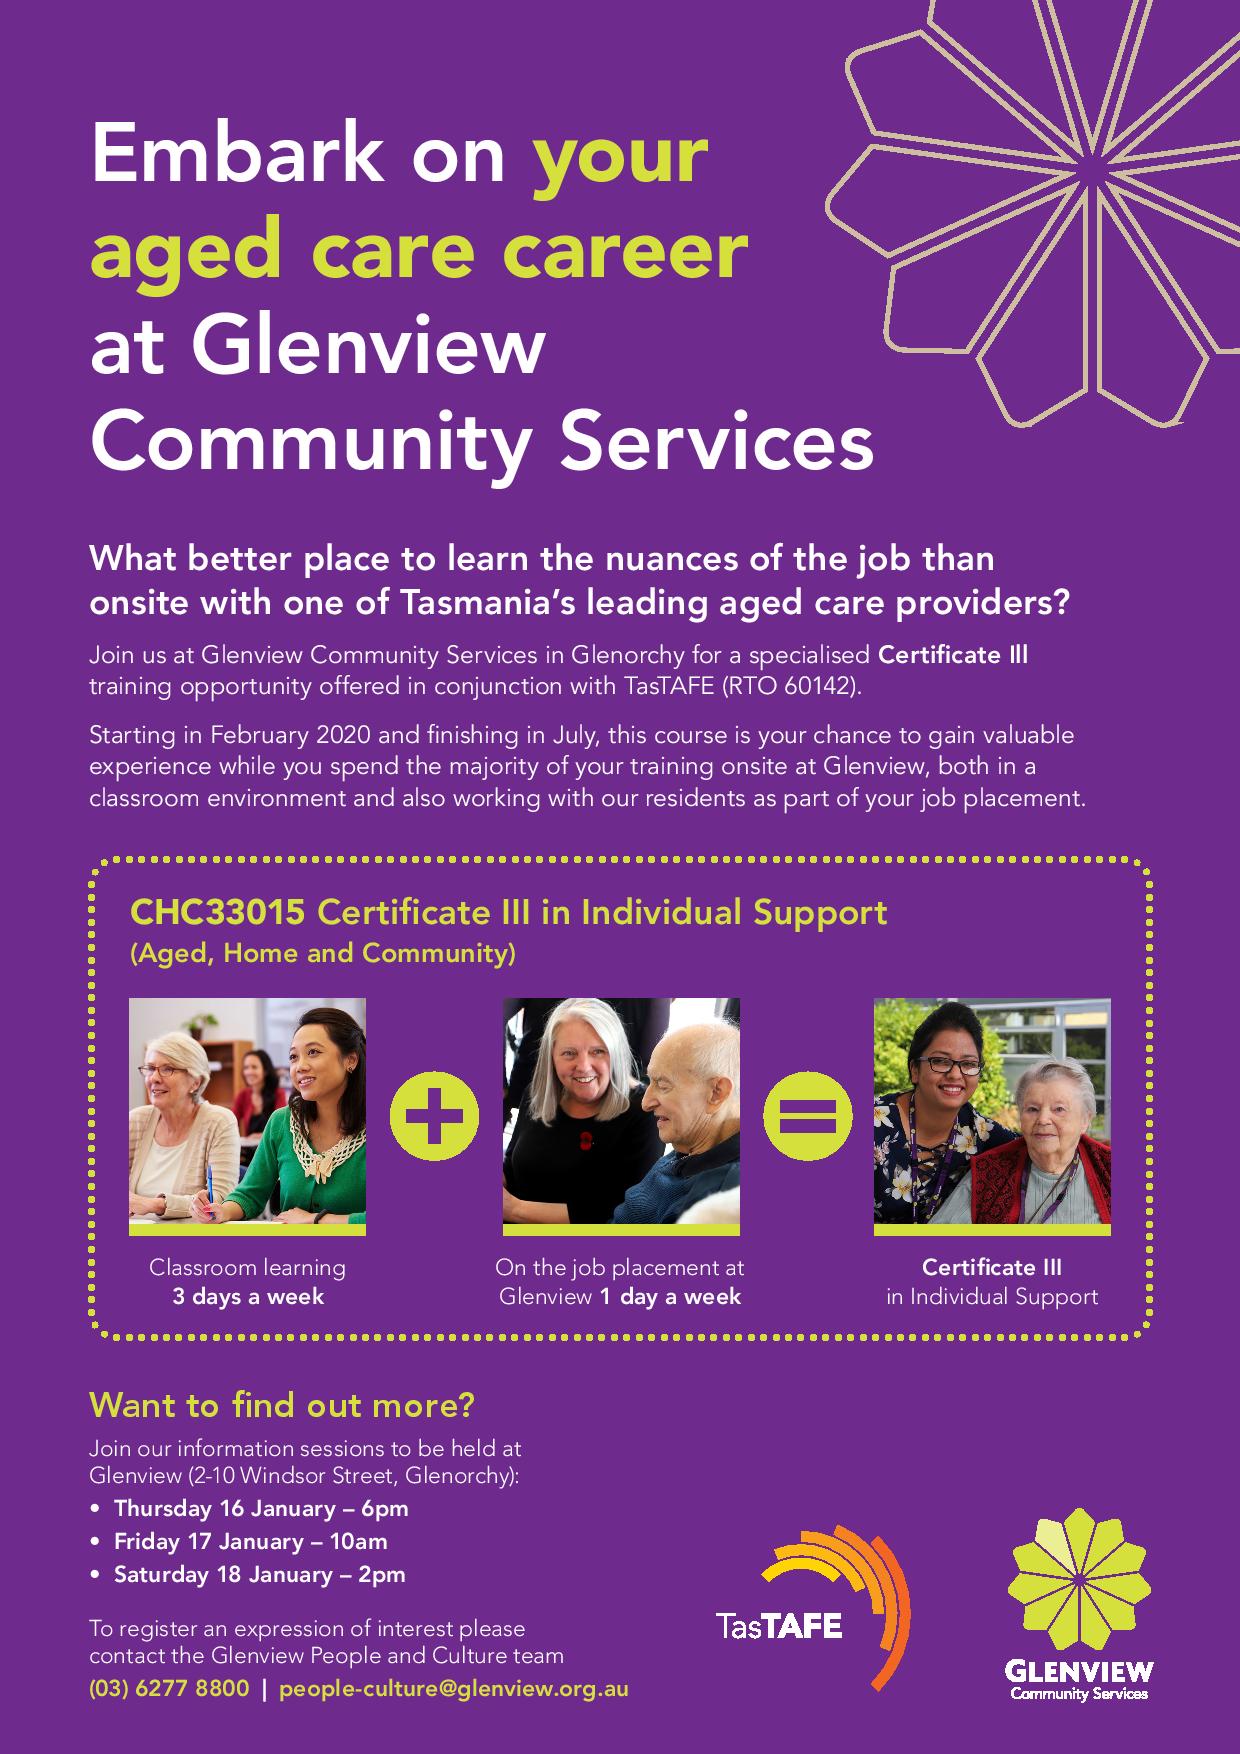 Study opportunity at Glenview